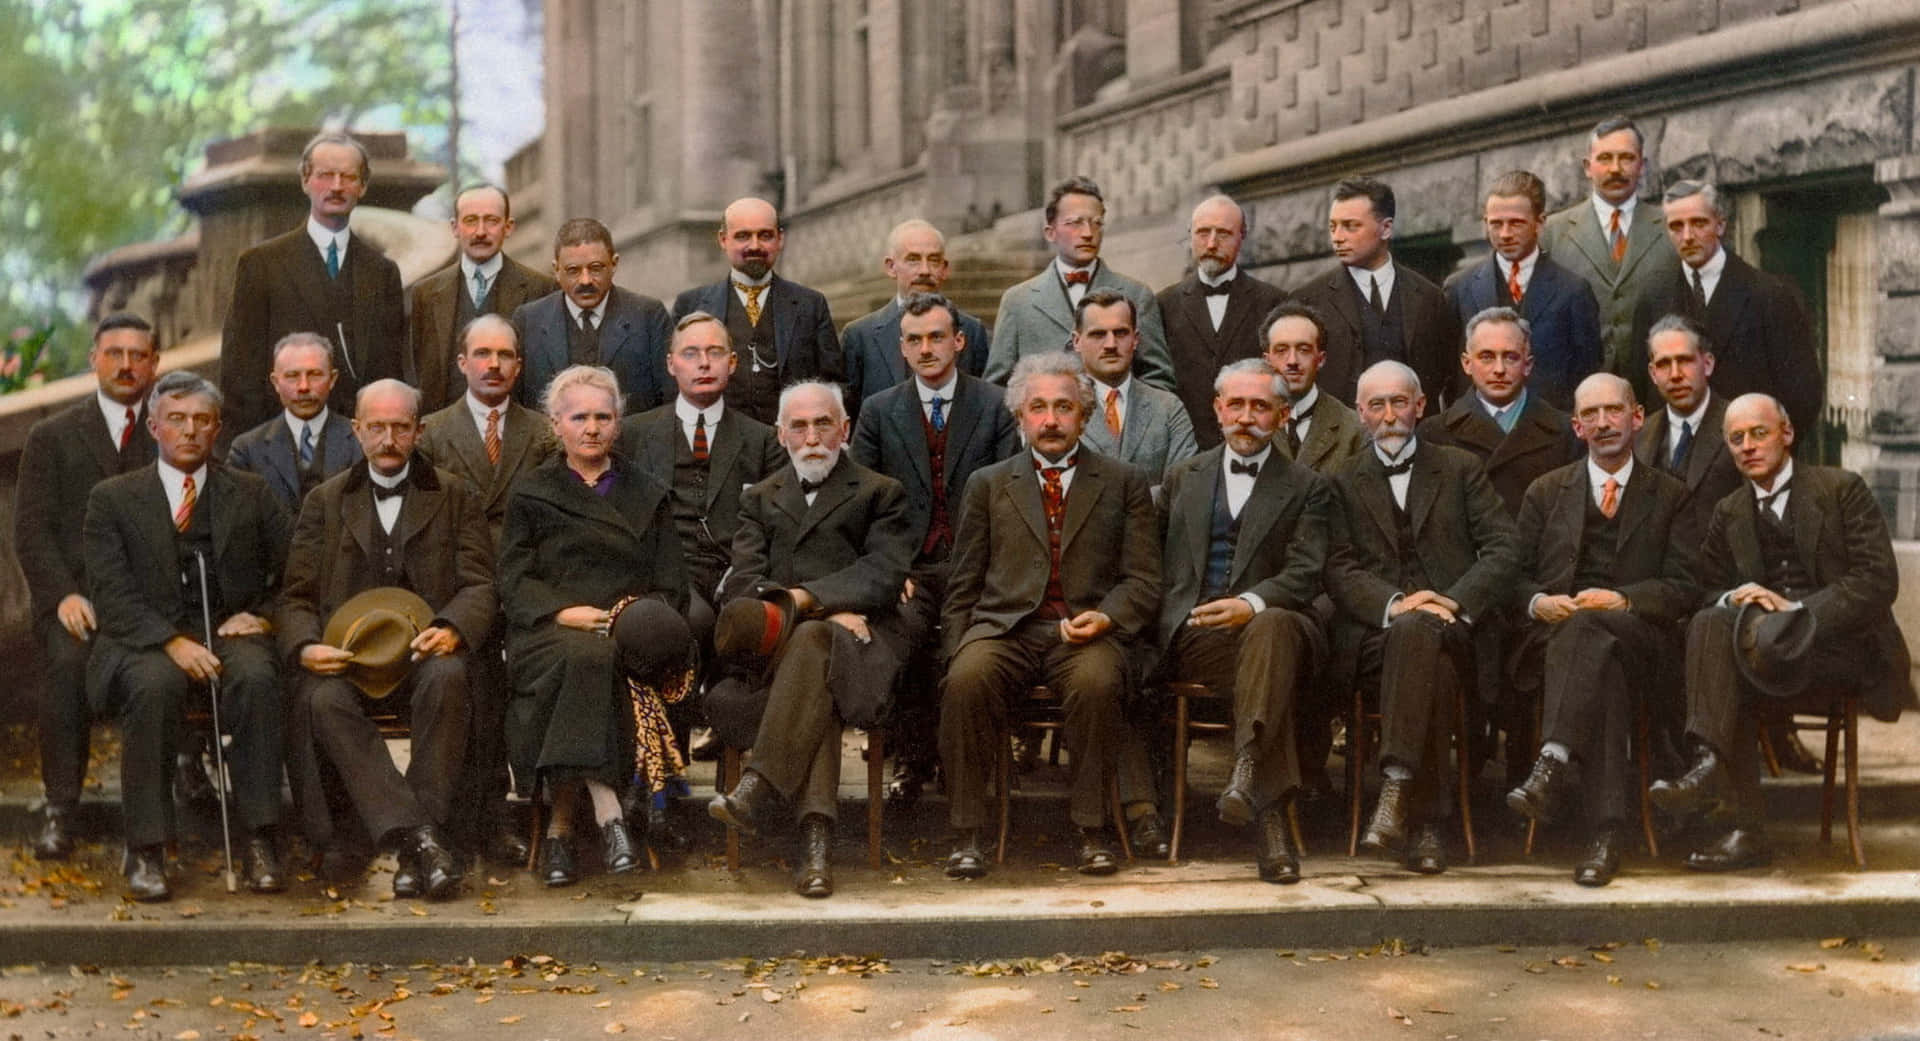 A Group Of Men In Suits Posing For A Picture